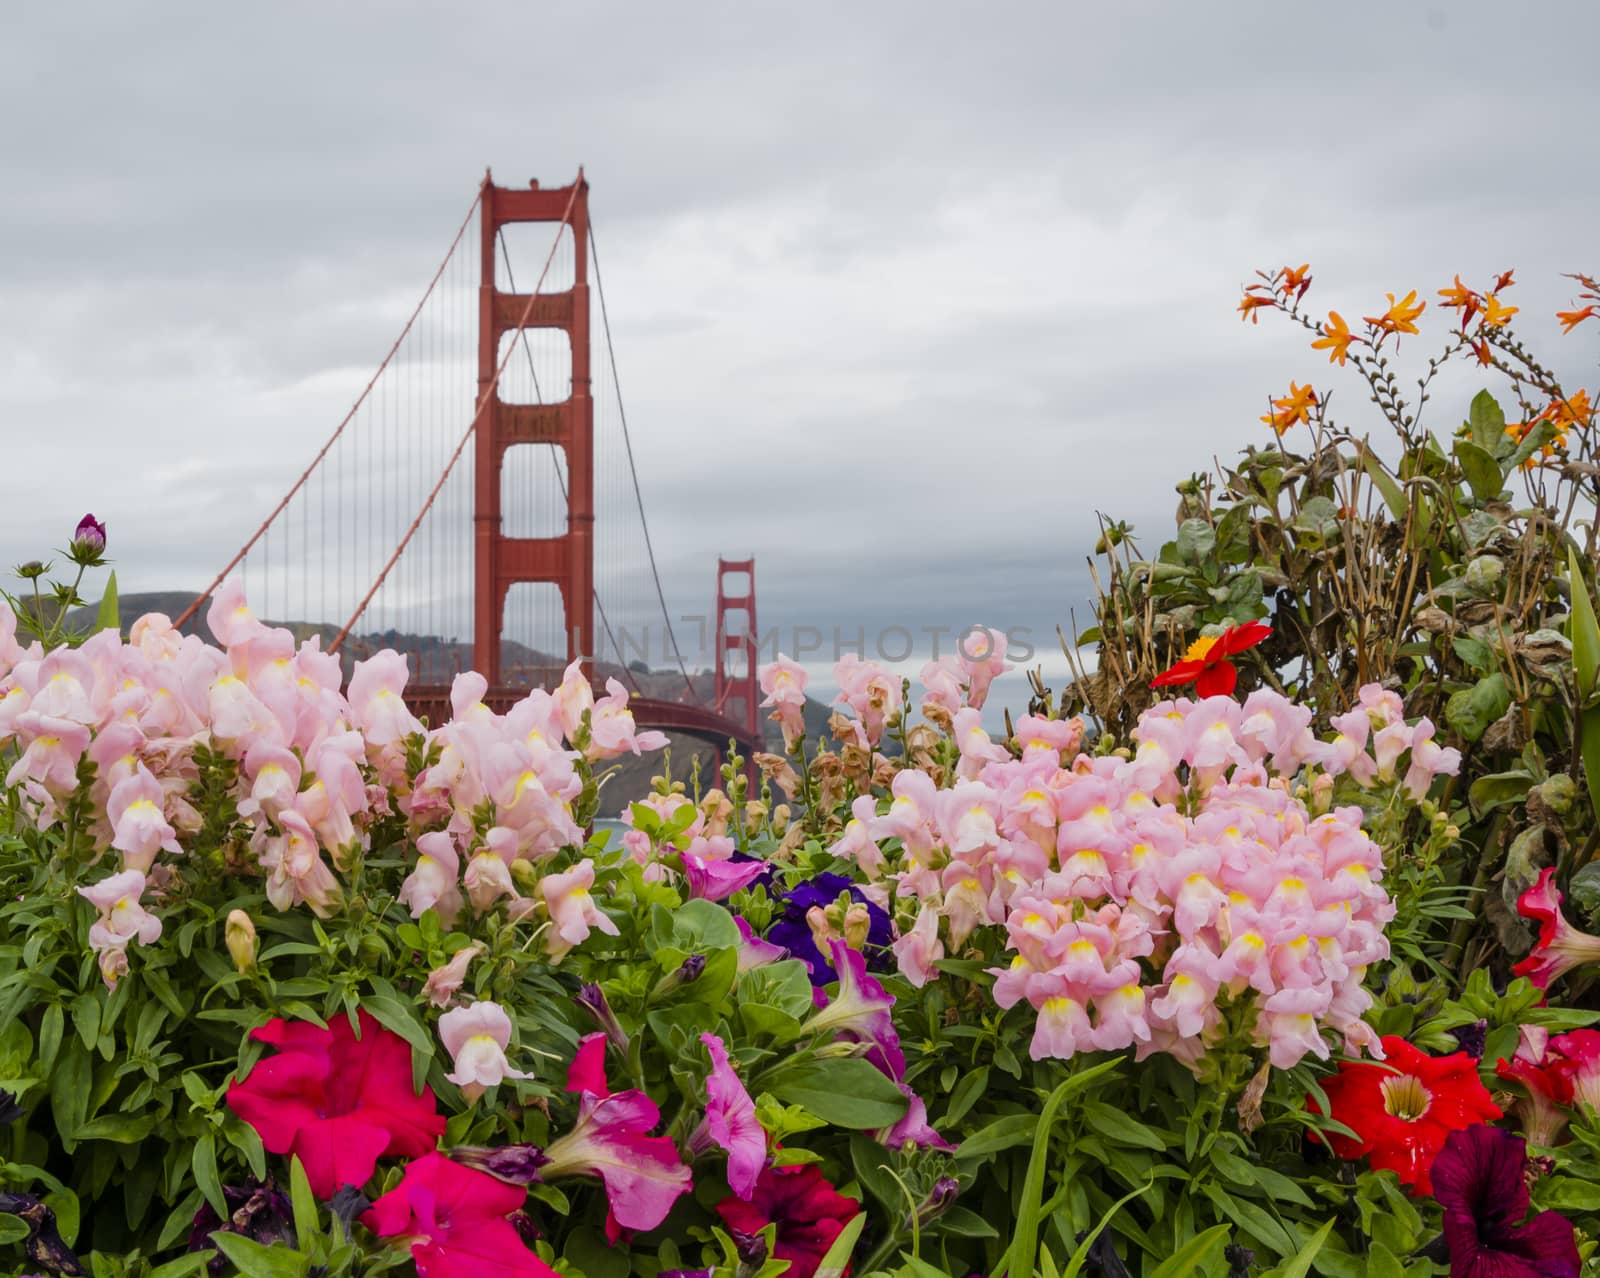 Golden Gate Bridge with colored flowers in a cloudy day